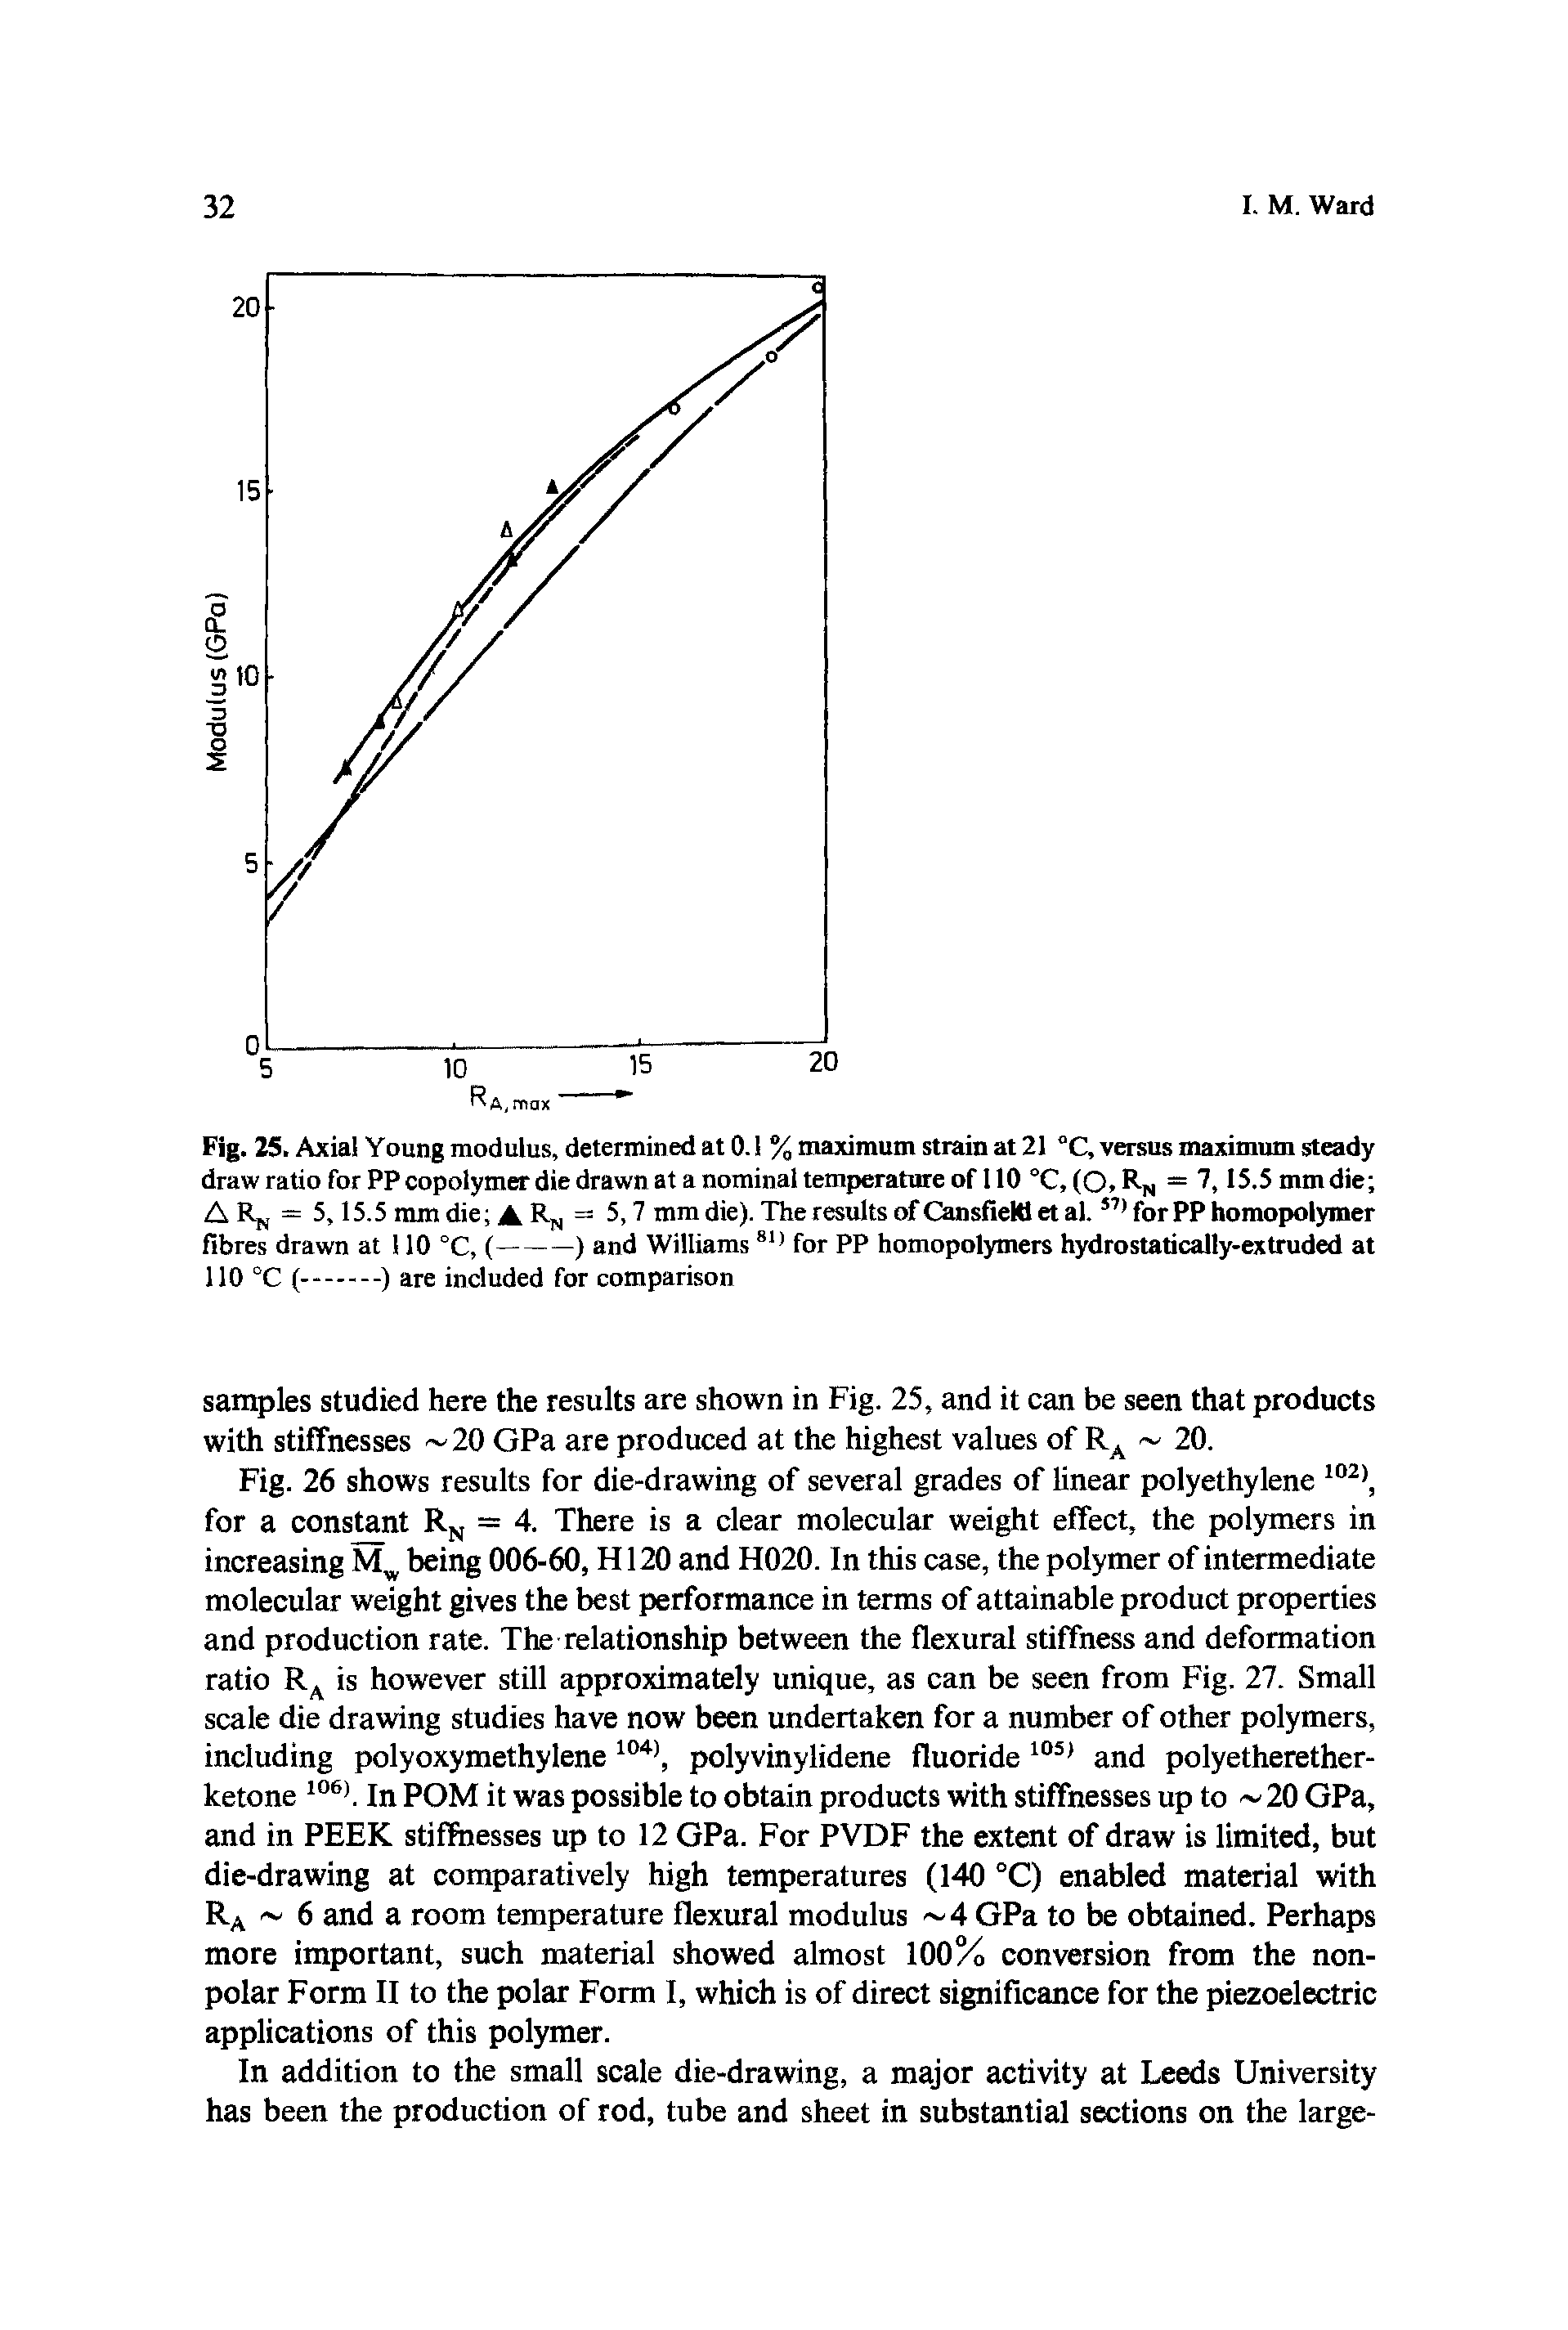 Fig. 25. Axial Young modulus, determined at 0.1 % maximum strain at 21 °C, versus maximum steady draw ratio for PP copolymer die drawn at a nominal temperahire of 110 °C,(0,R-n = 15.5 mm die ...